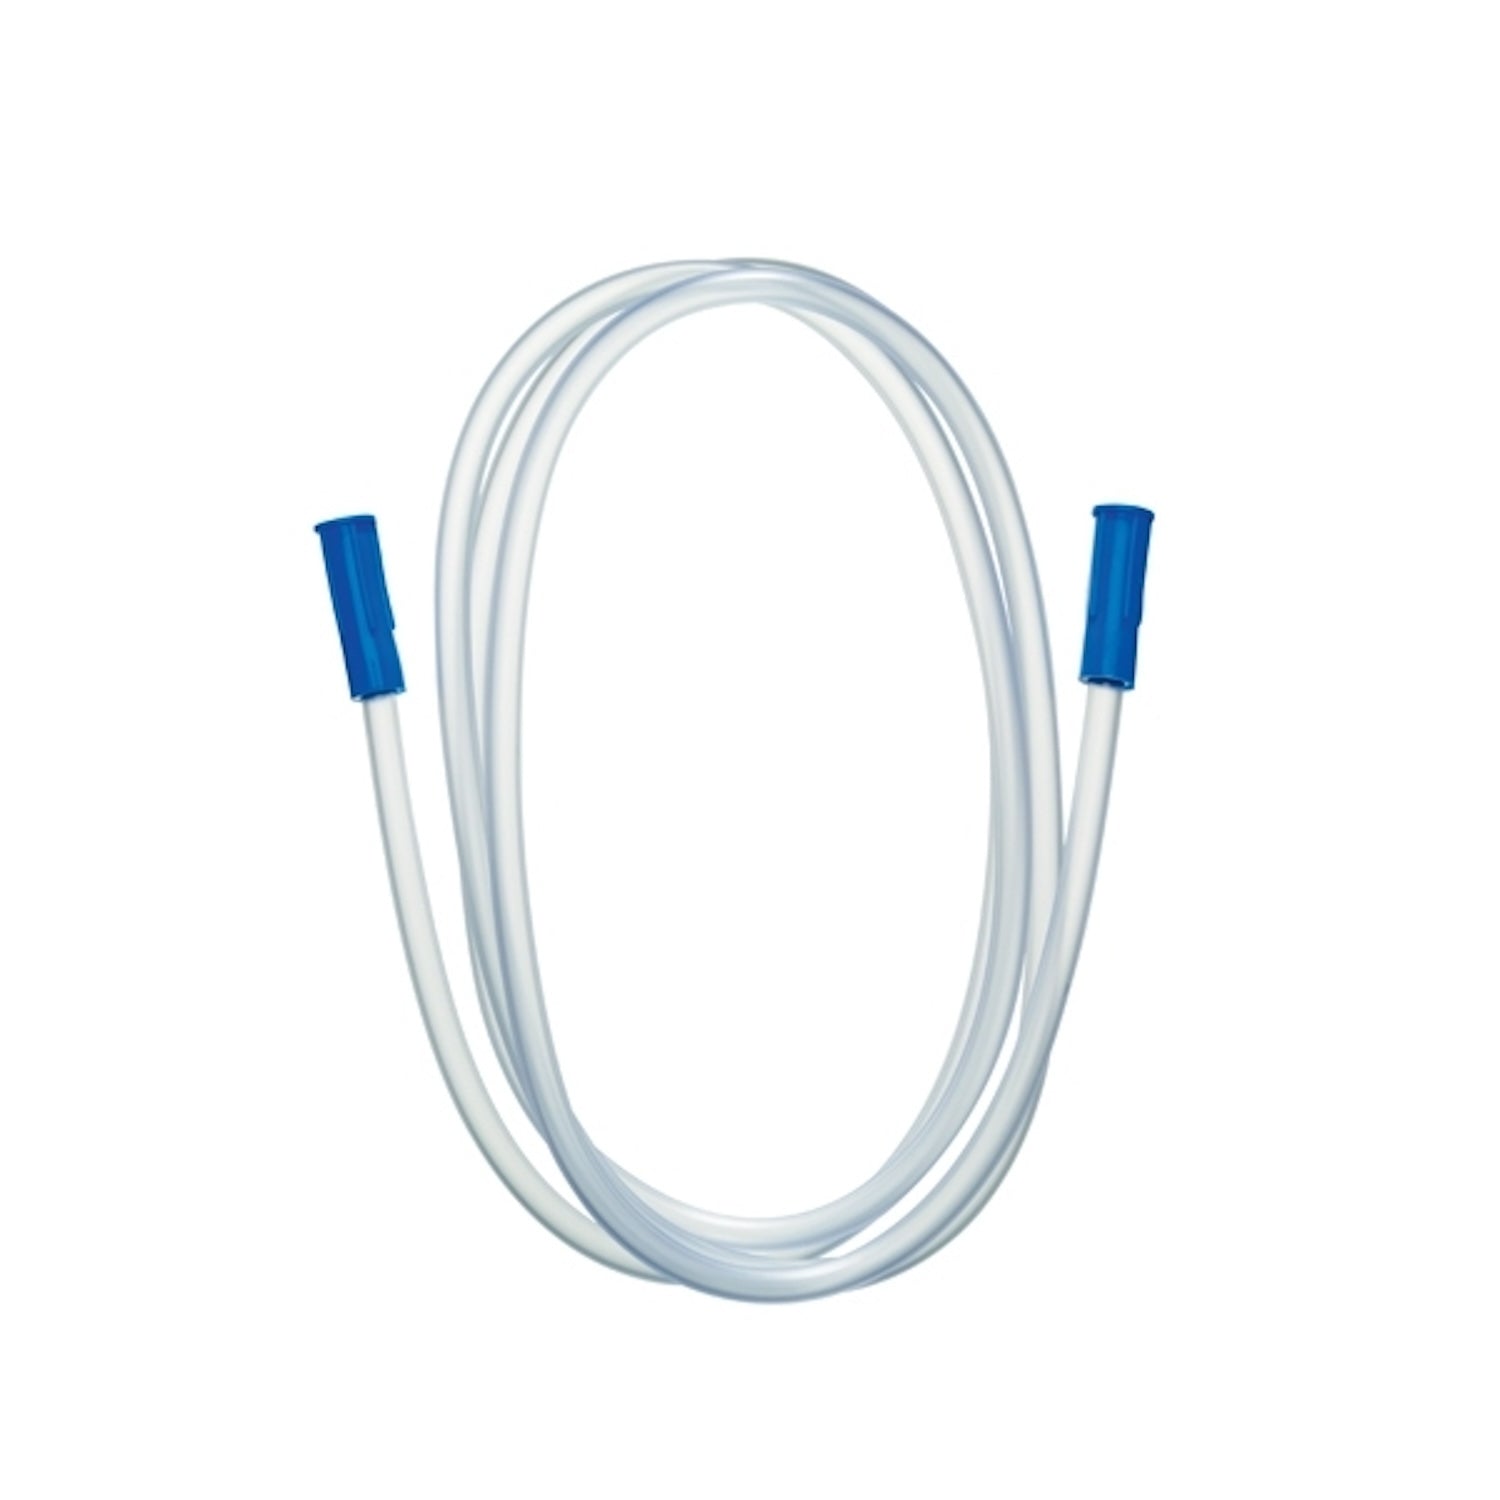 Sterile Suction Connection Tubing | 200cm | 5mm Bore | Pack of 25 (1)